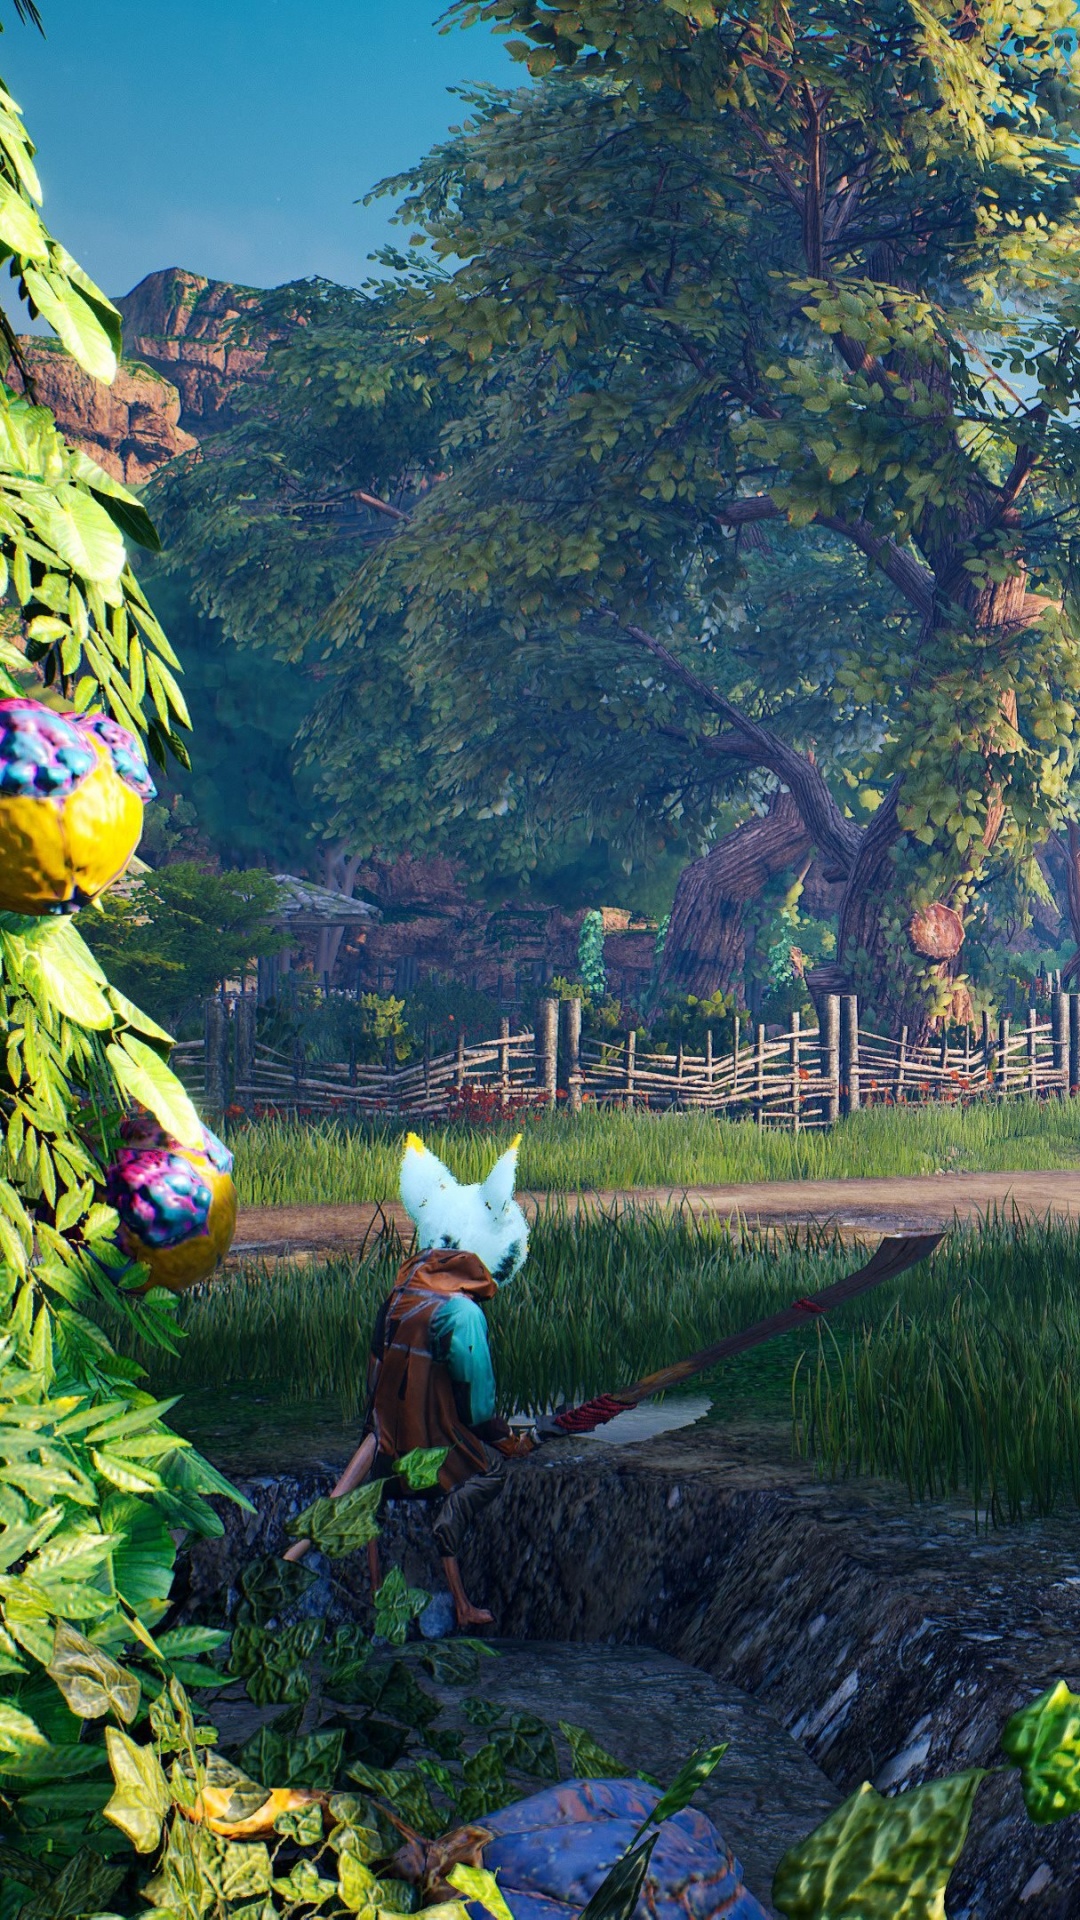 Biomutant, Monde Ouvert, Playstation 4, Nature, Paysage Naturel. Wallpaper in 1080x1920 Resolution